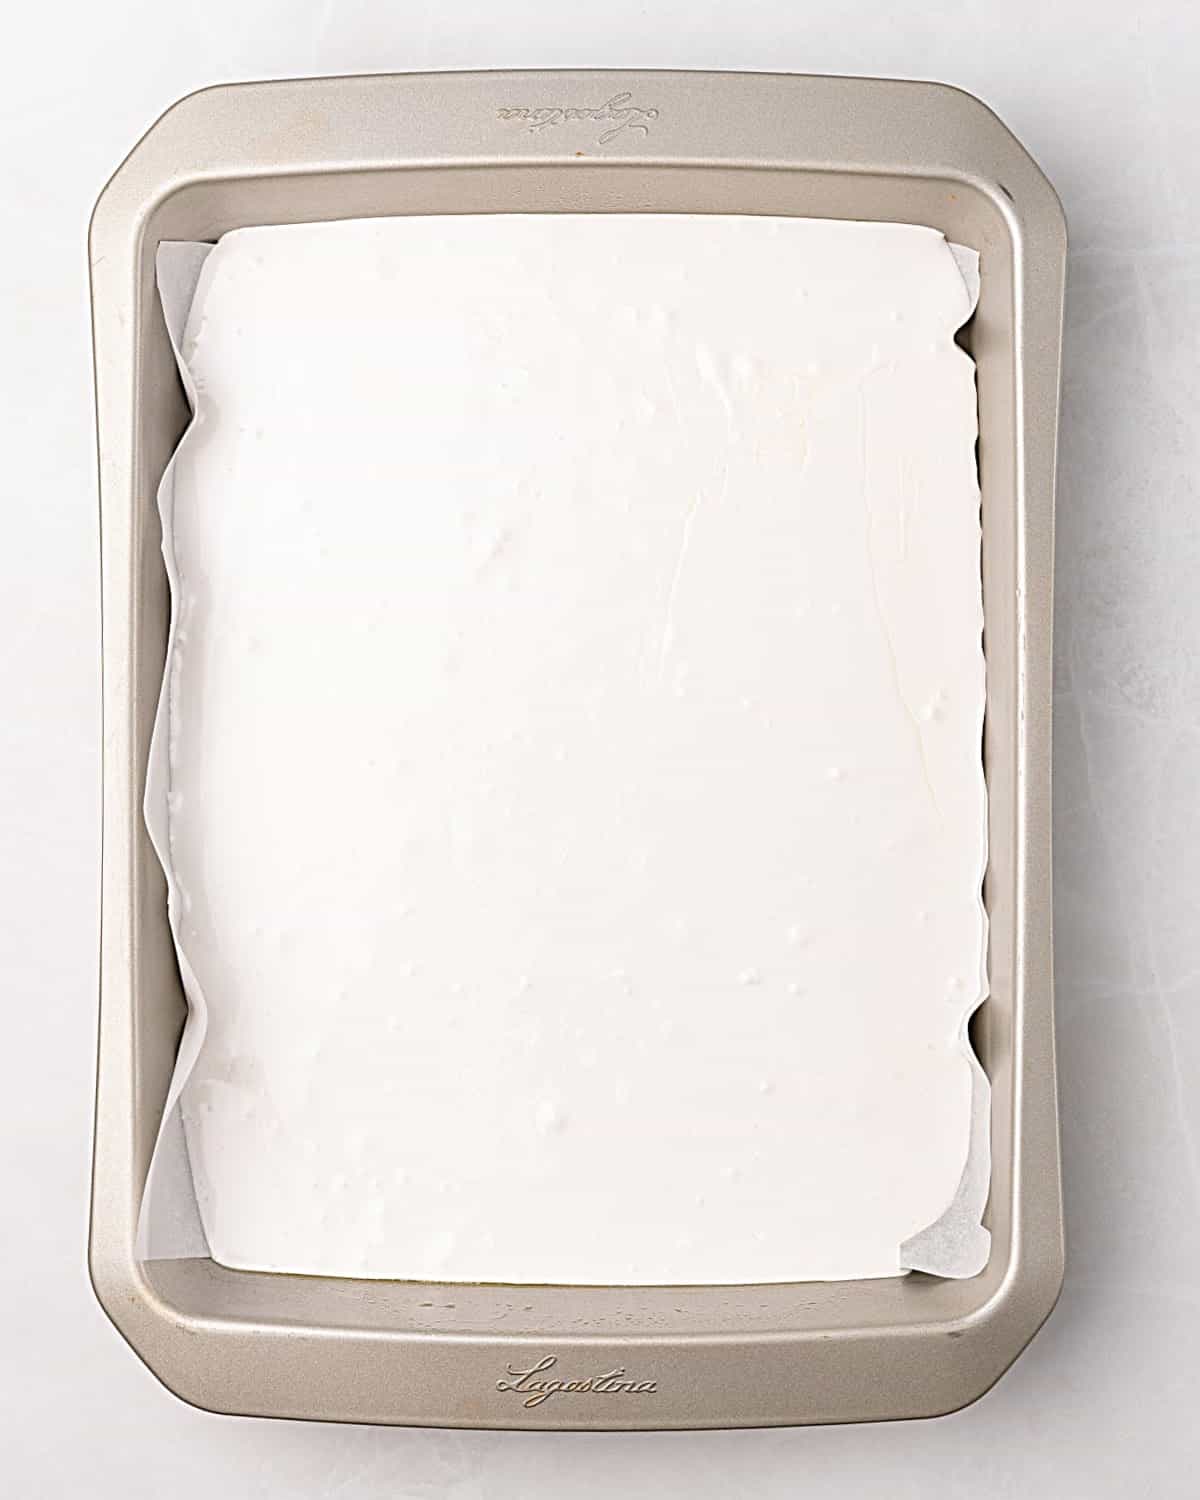 Marshmallow mixture in a rectangular pan on a white surface.